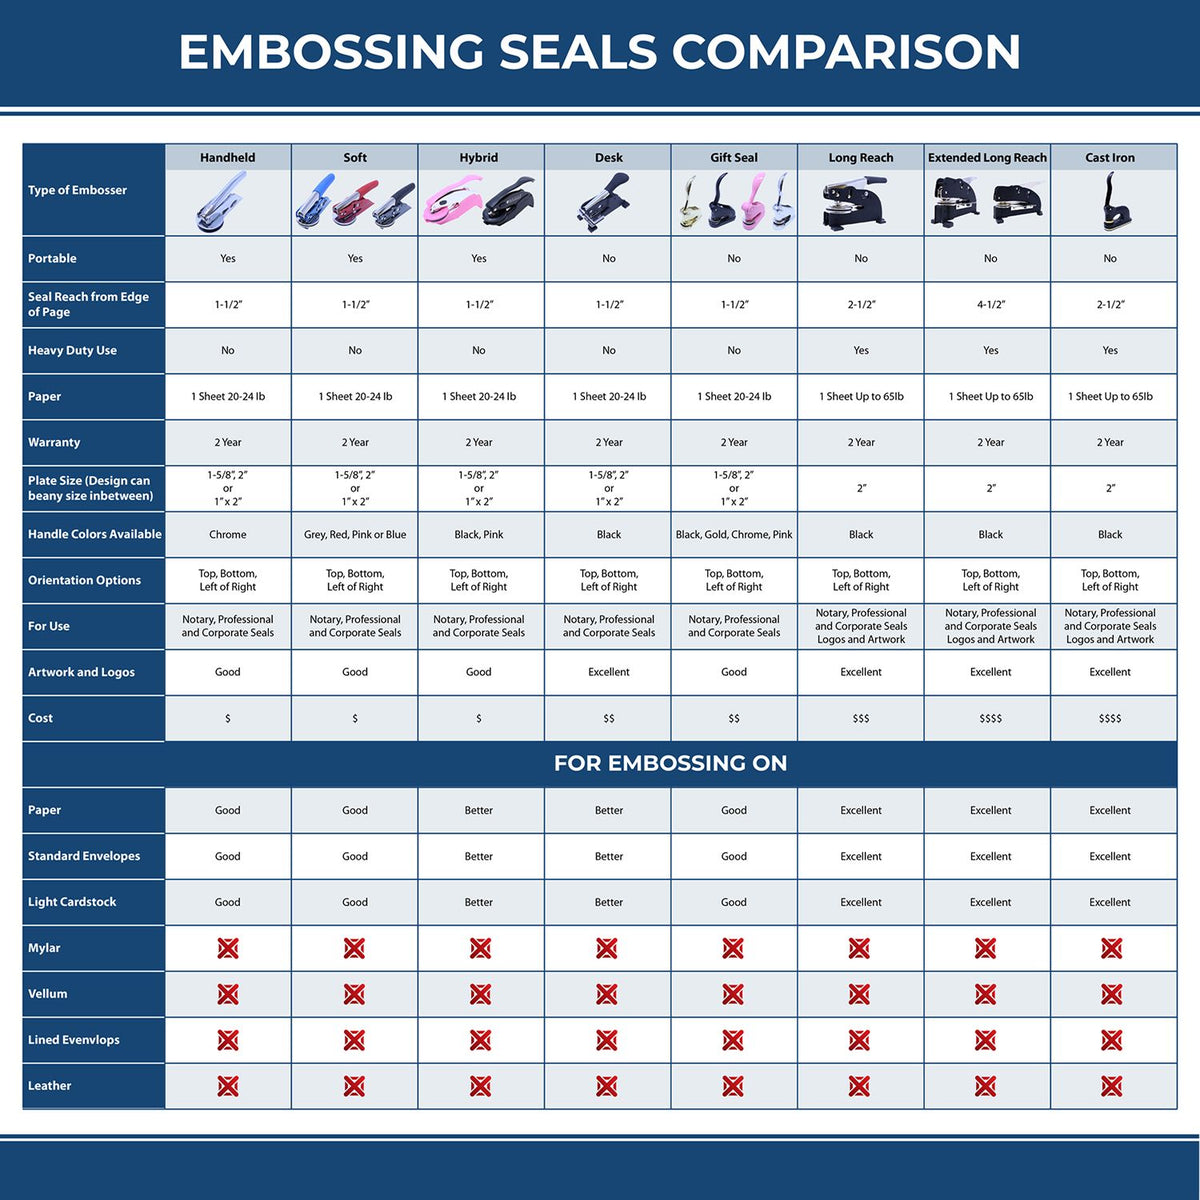 A comparison chart for the different types of mount models available for the Soft Utah Professional Geologist Seal